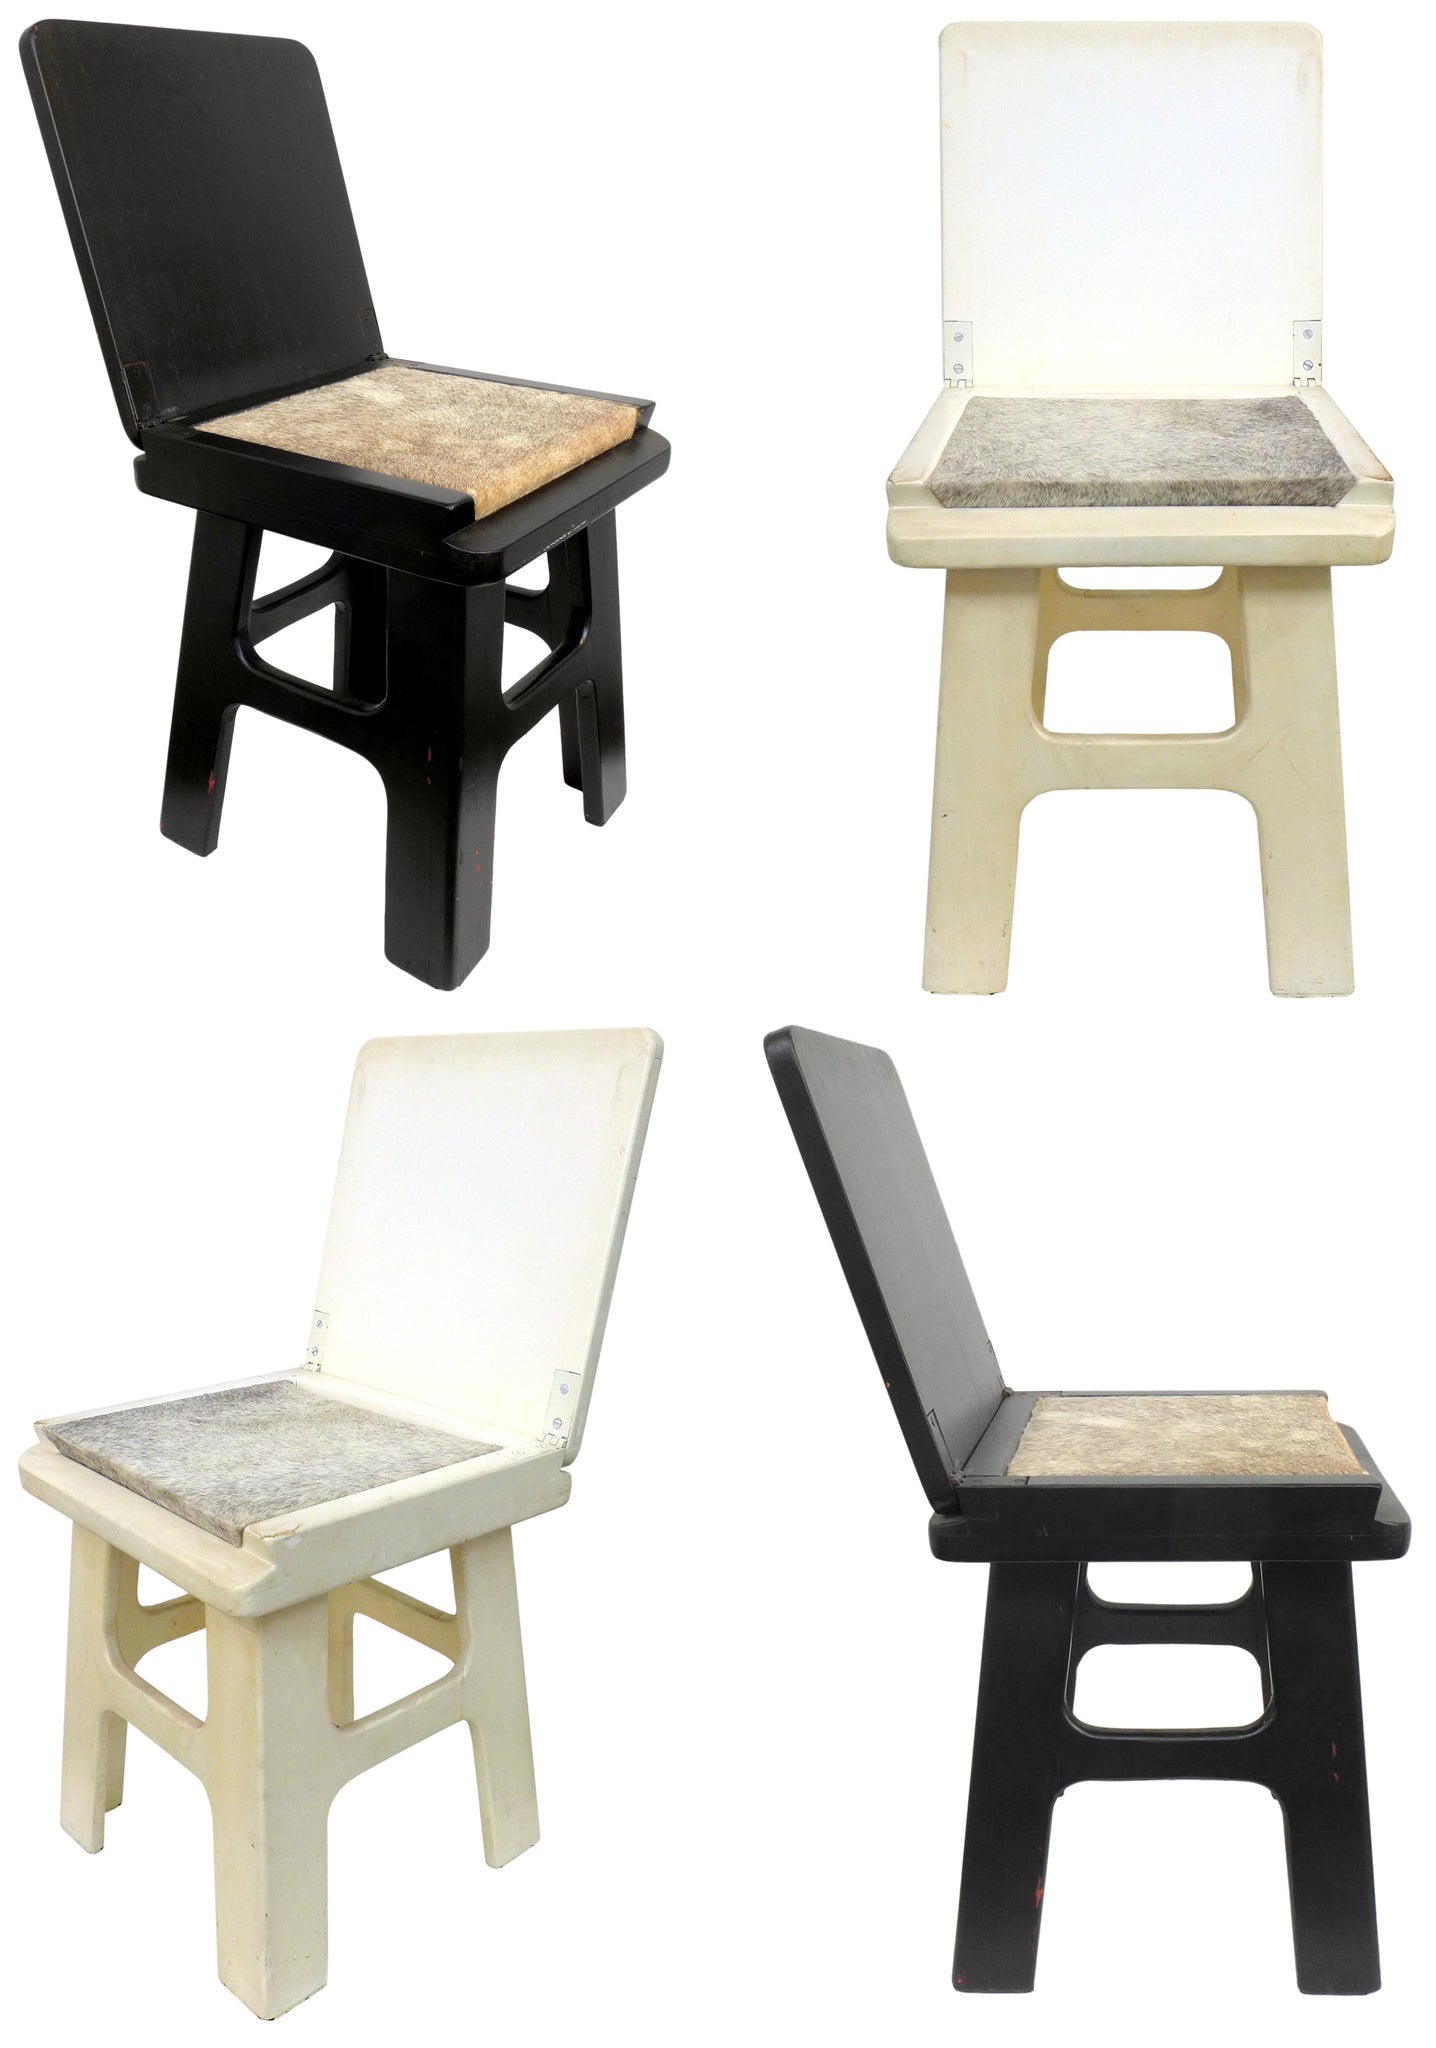 Italian Set of 4 Enameled Wood with Cowhide Convertible Chairs/Stools